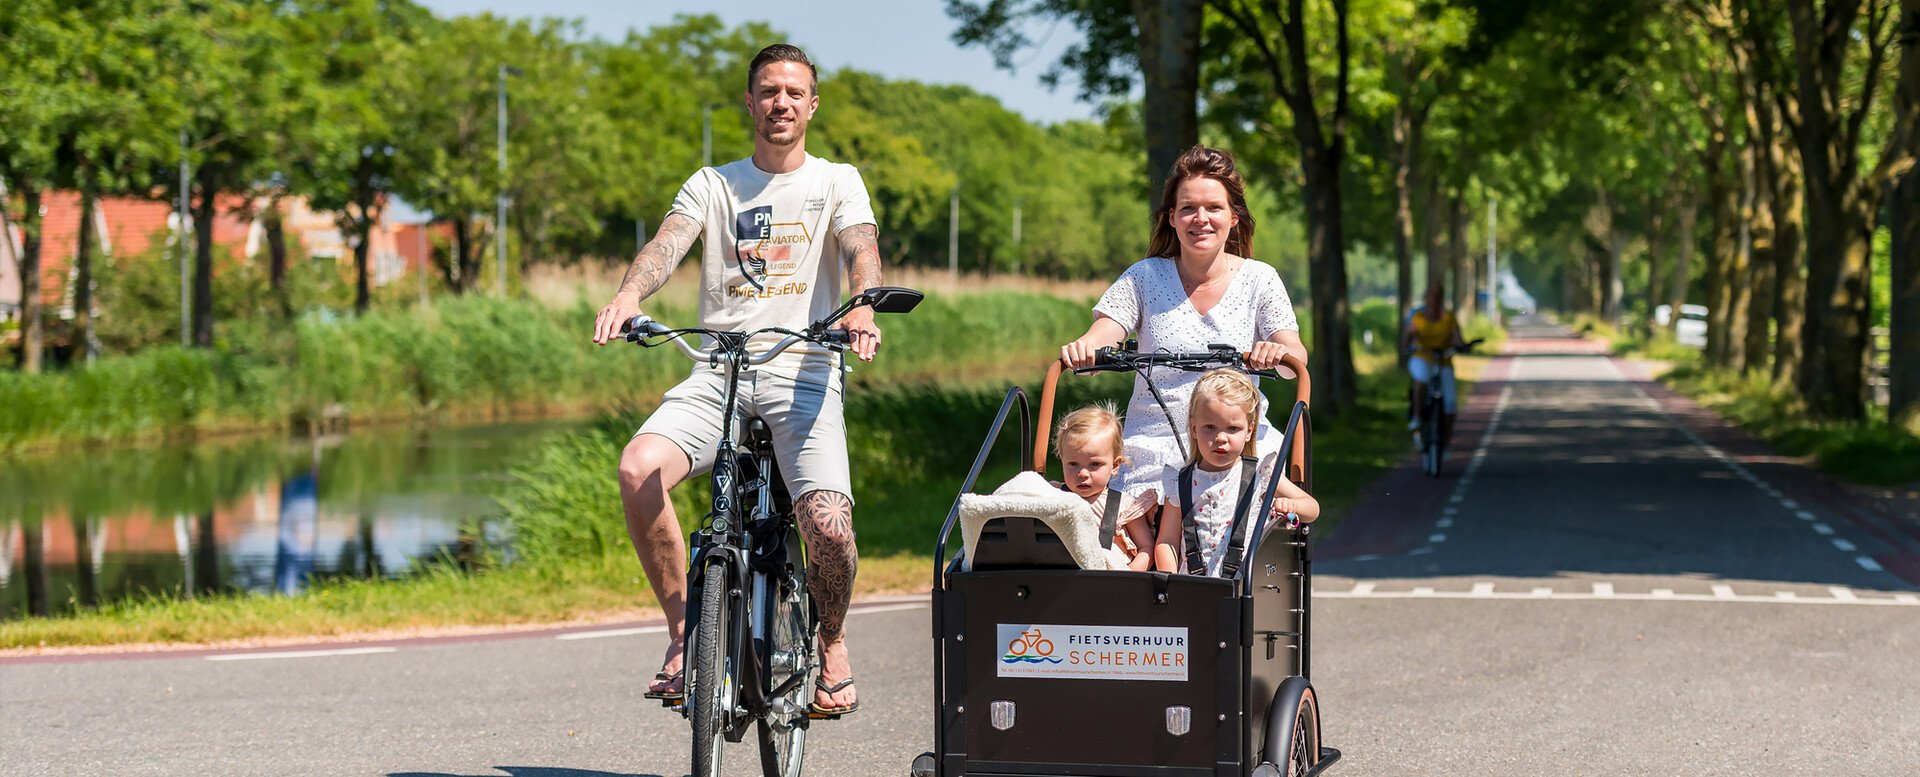 Explore the most beautiful cycling routes of the Schermer on the e-bikes of Fietsverhuur Schermer